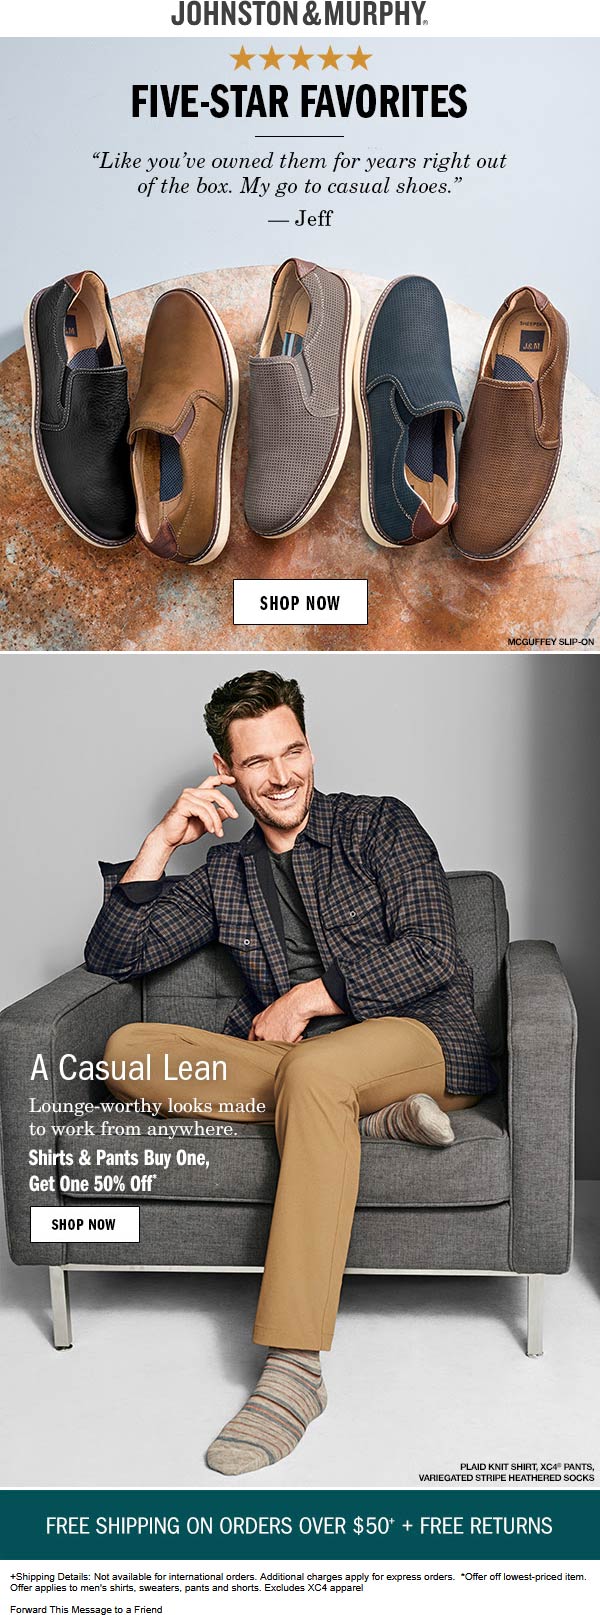 Johnston & Murphy stores Coupon  Second shirt or pants 50% off at Johnston & Murphy #johnstonmurphy 